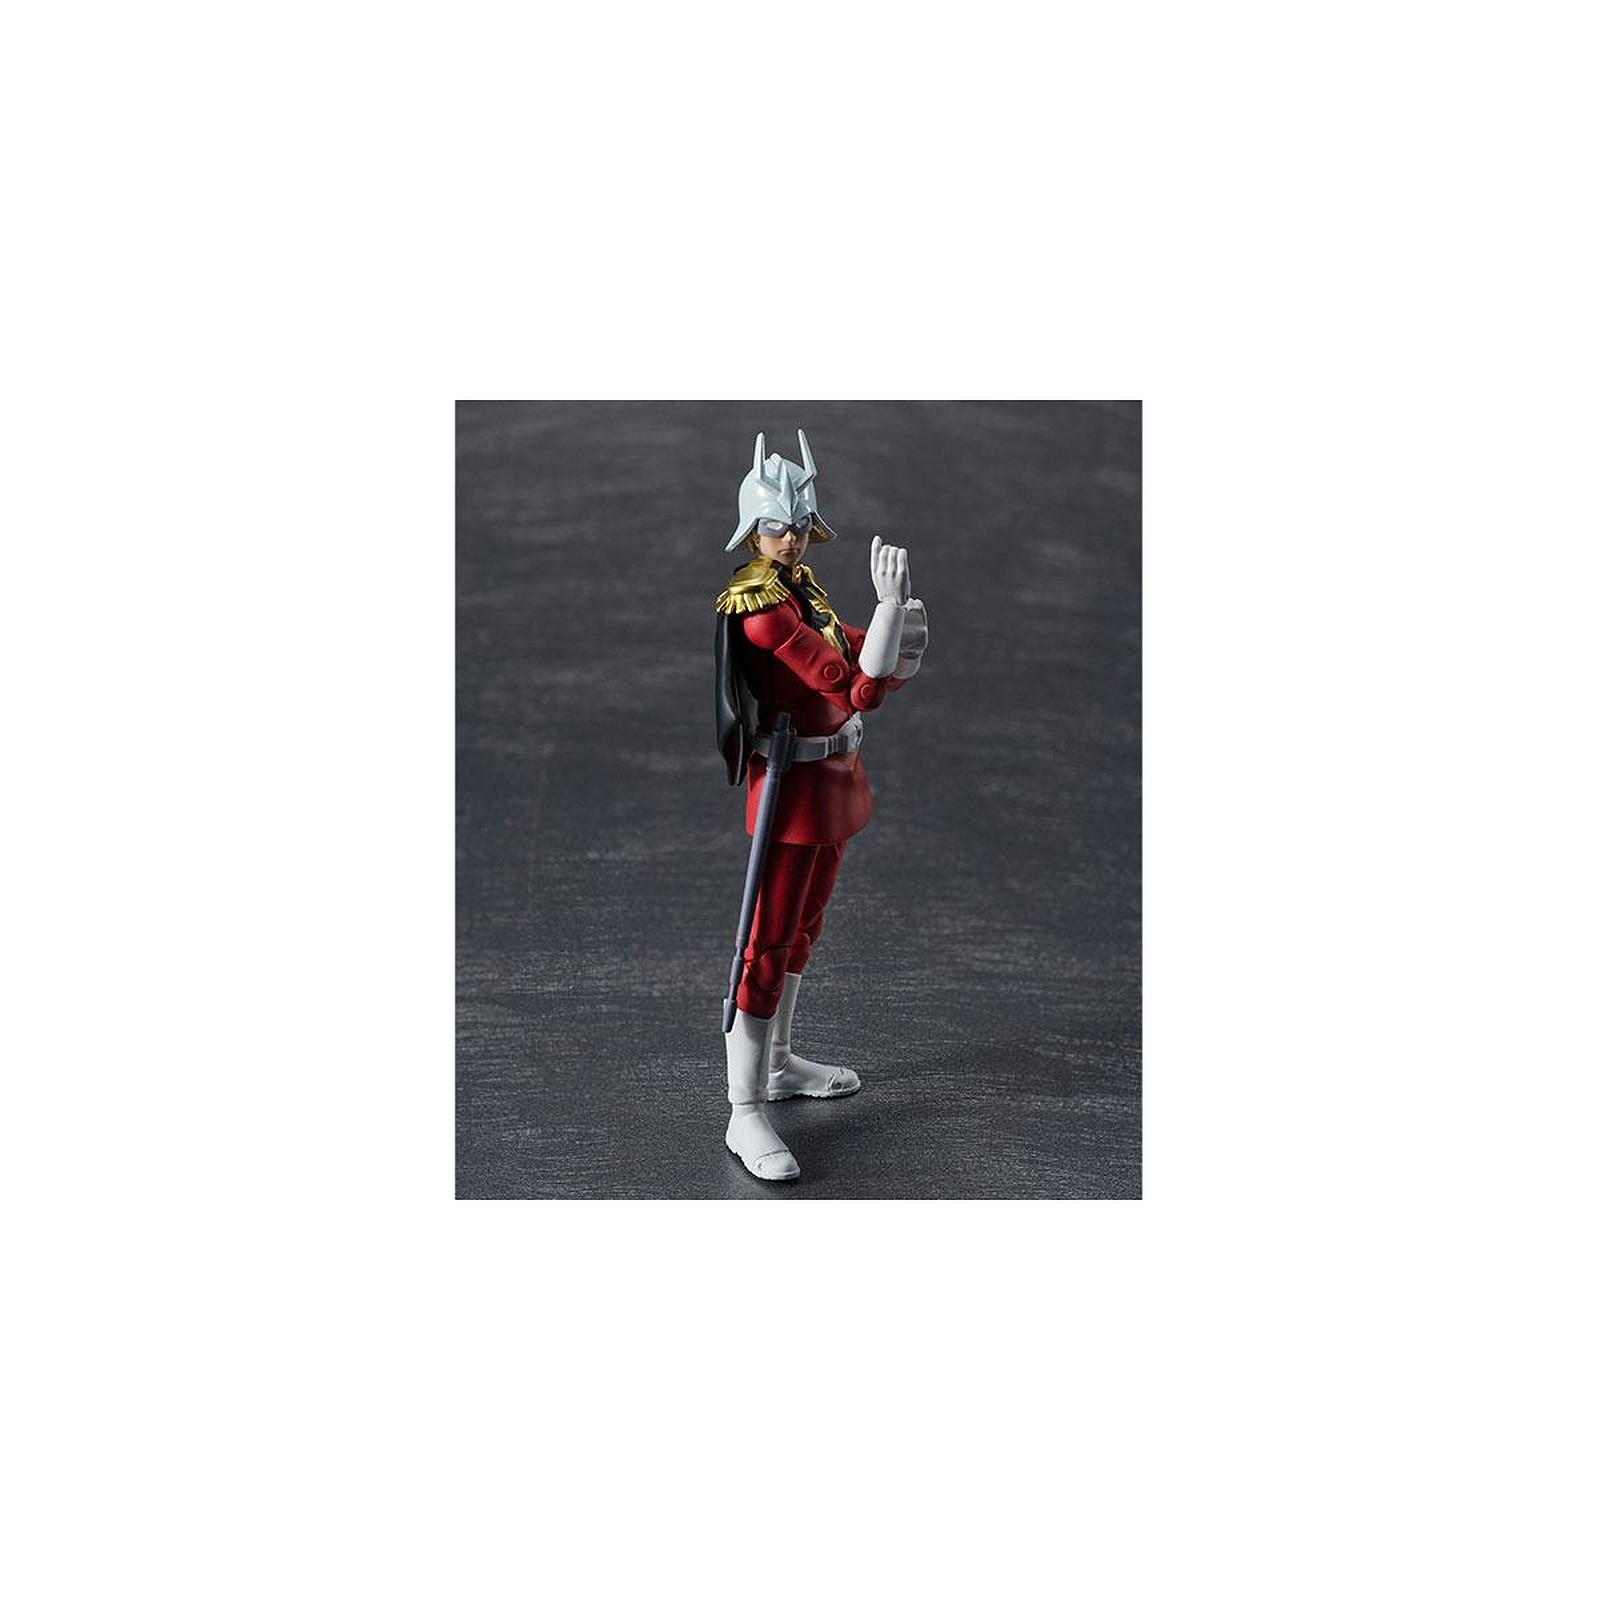 Mobile Suit Gundam - Figurine G.M.G. Principality of Zeon Army Soldier 06 Char Aznable 10 cm - Figurines Megahouse